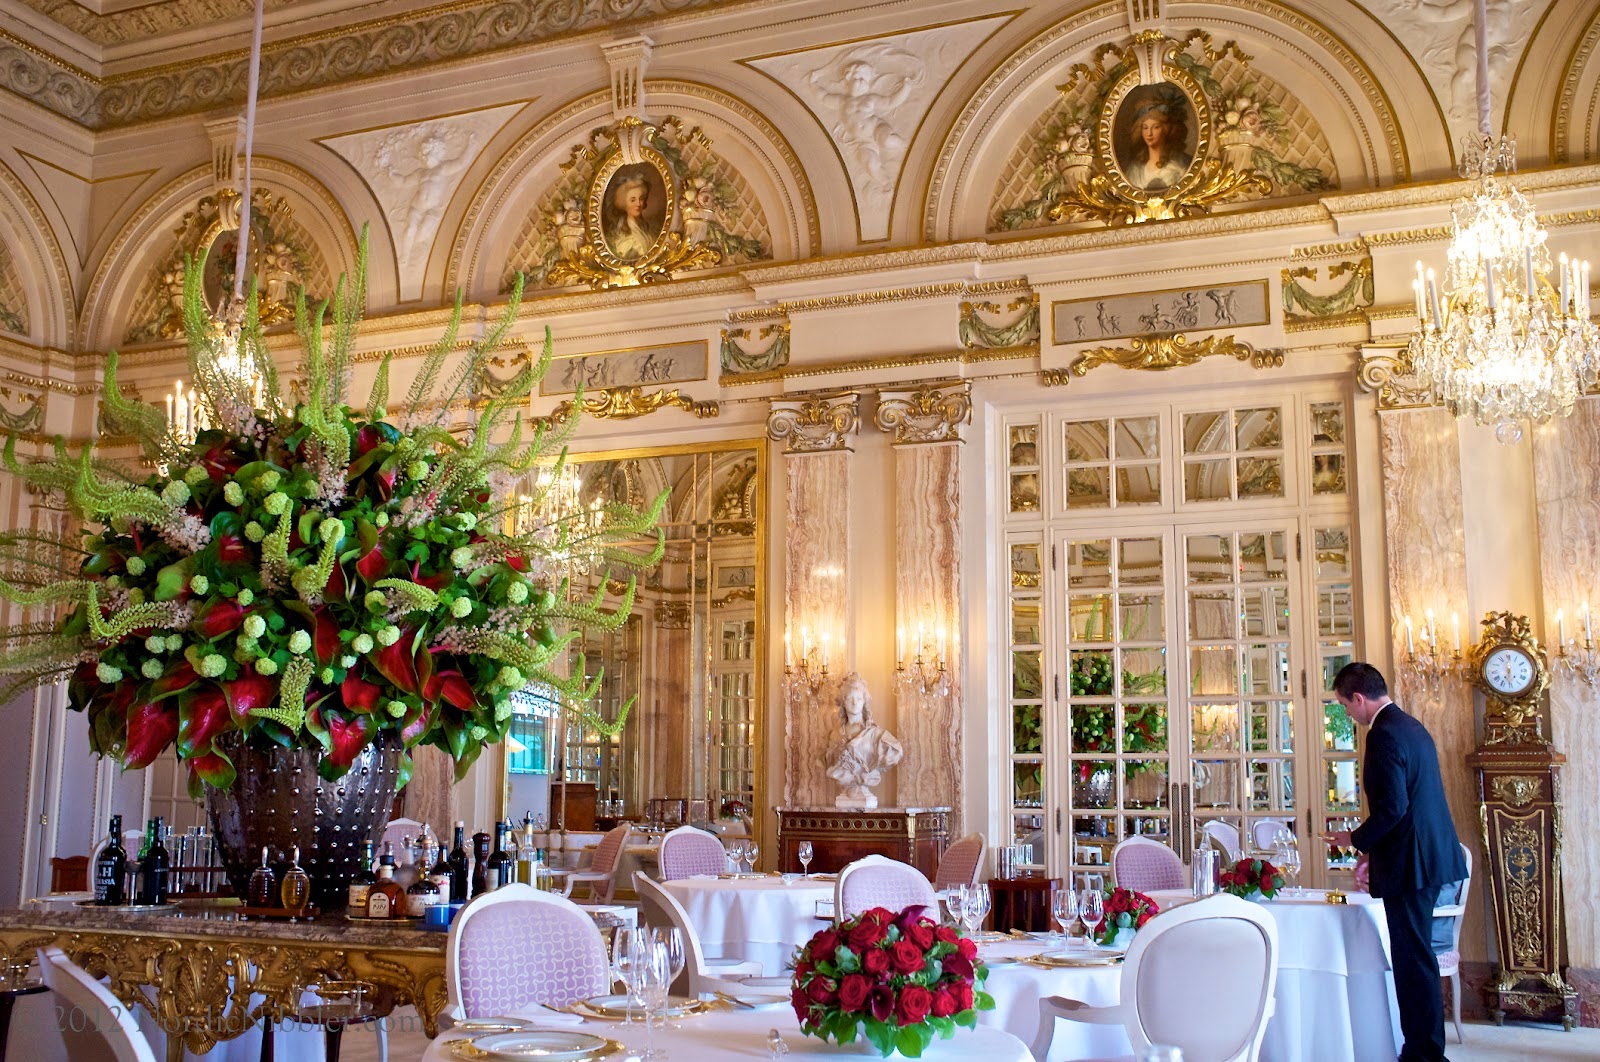 Passion For Luxury : 10 most beautiful restaurants in the world